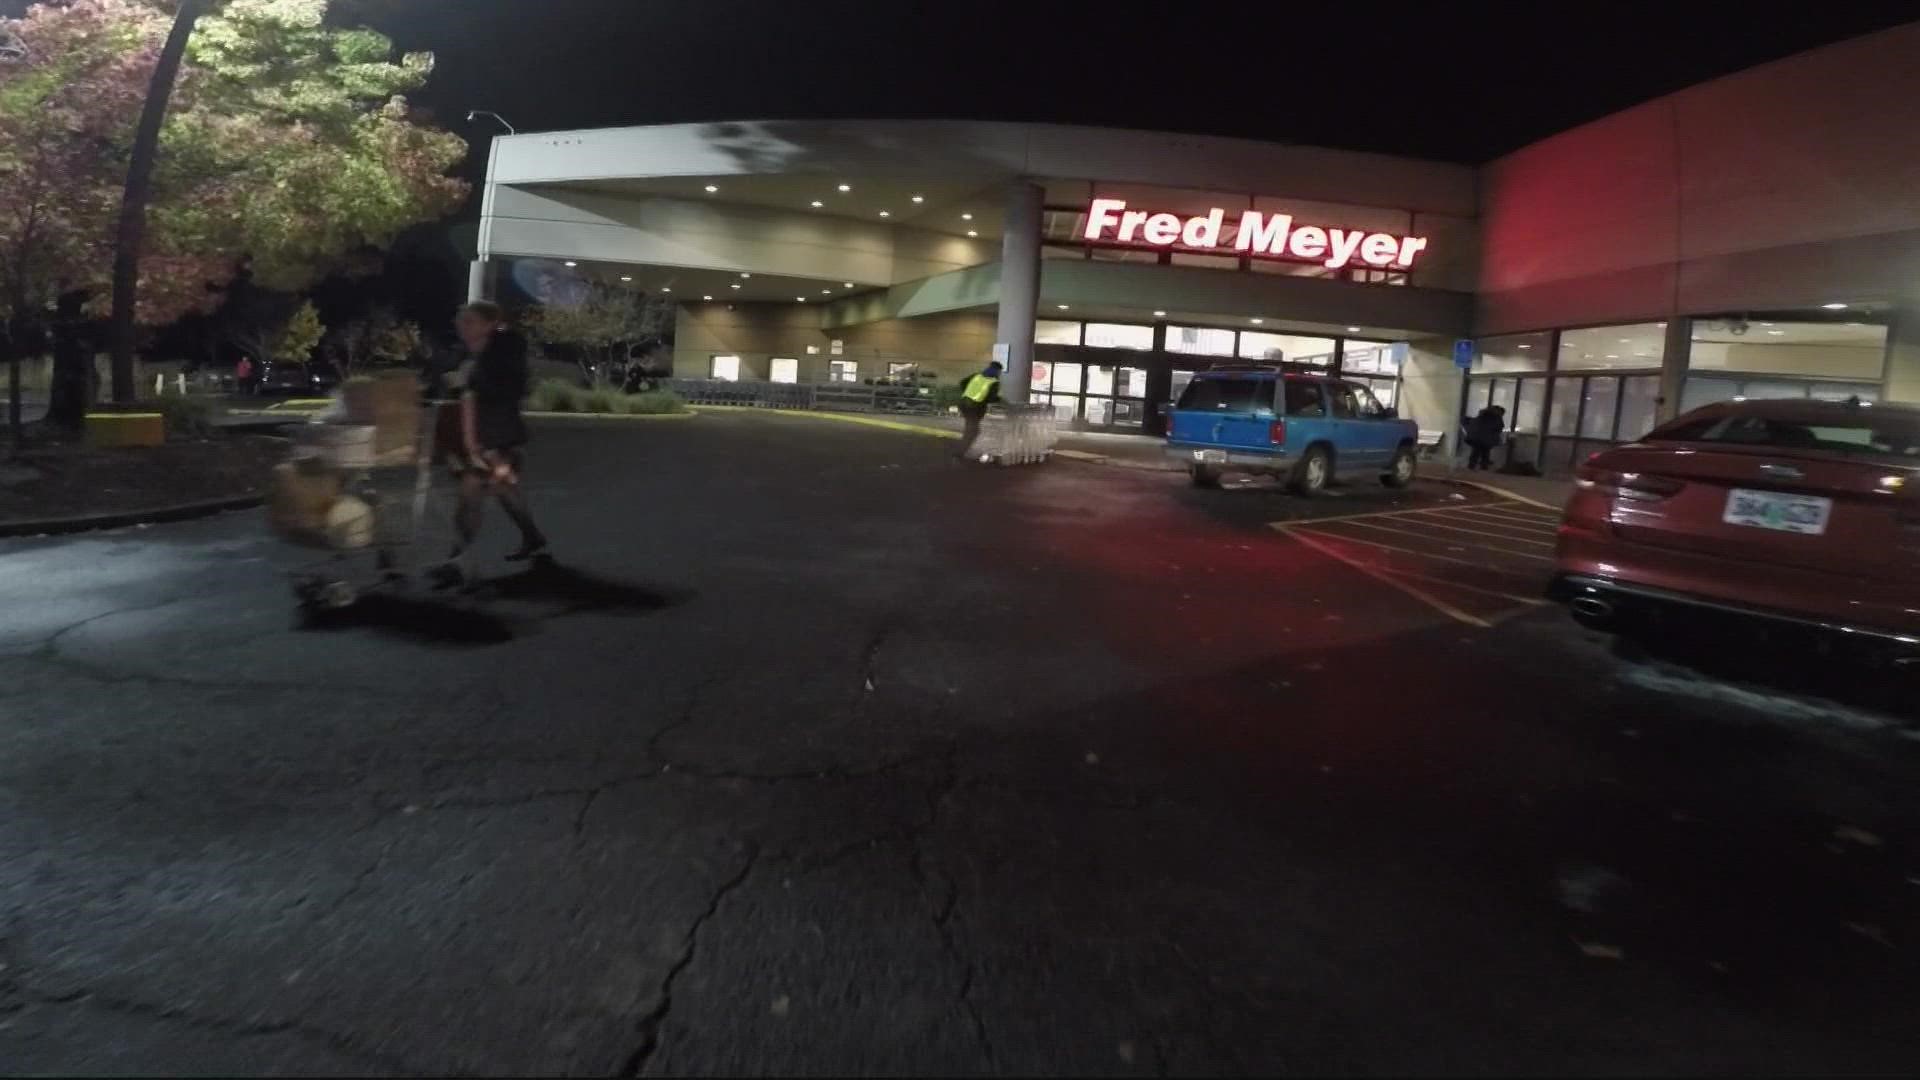 Fred Meyer said at some of its stores it recently began classical music to deter "illegal activity" but neighbors are saying its disruptive to them and "inhumane."